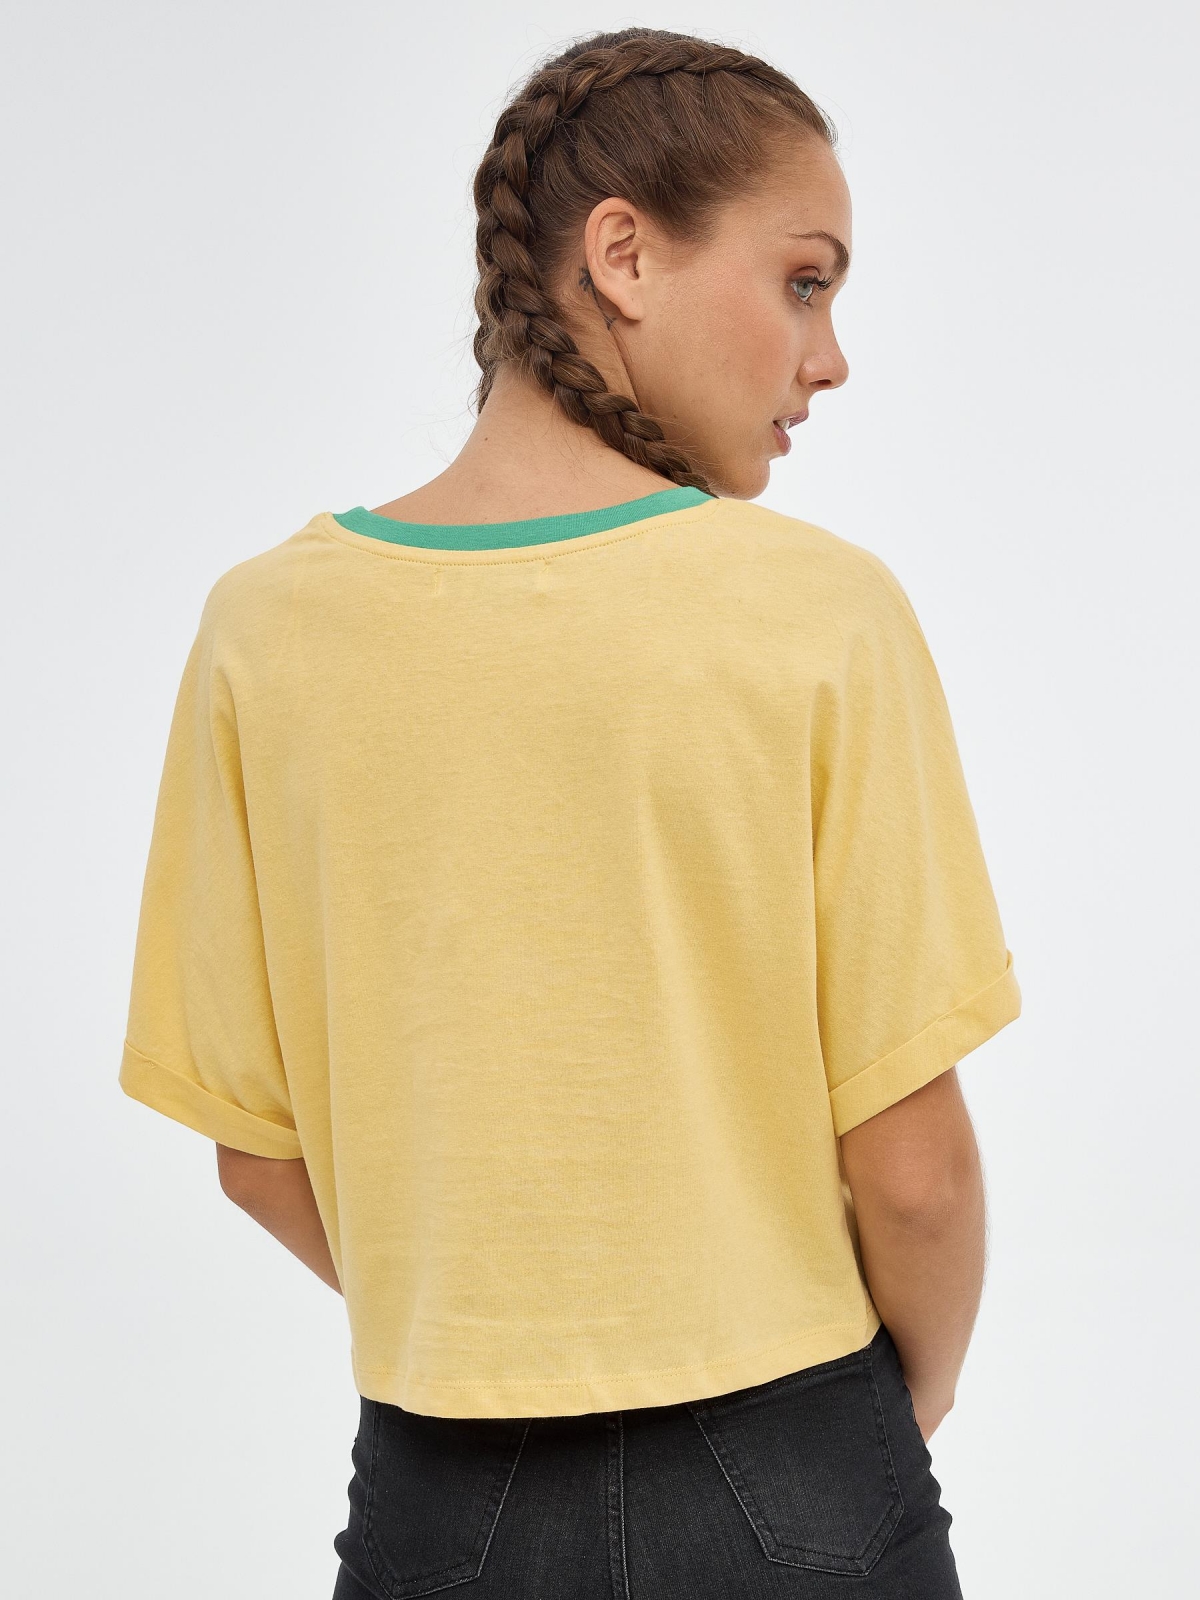 Chameleon crop top pastel yellow middle back view